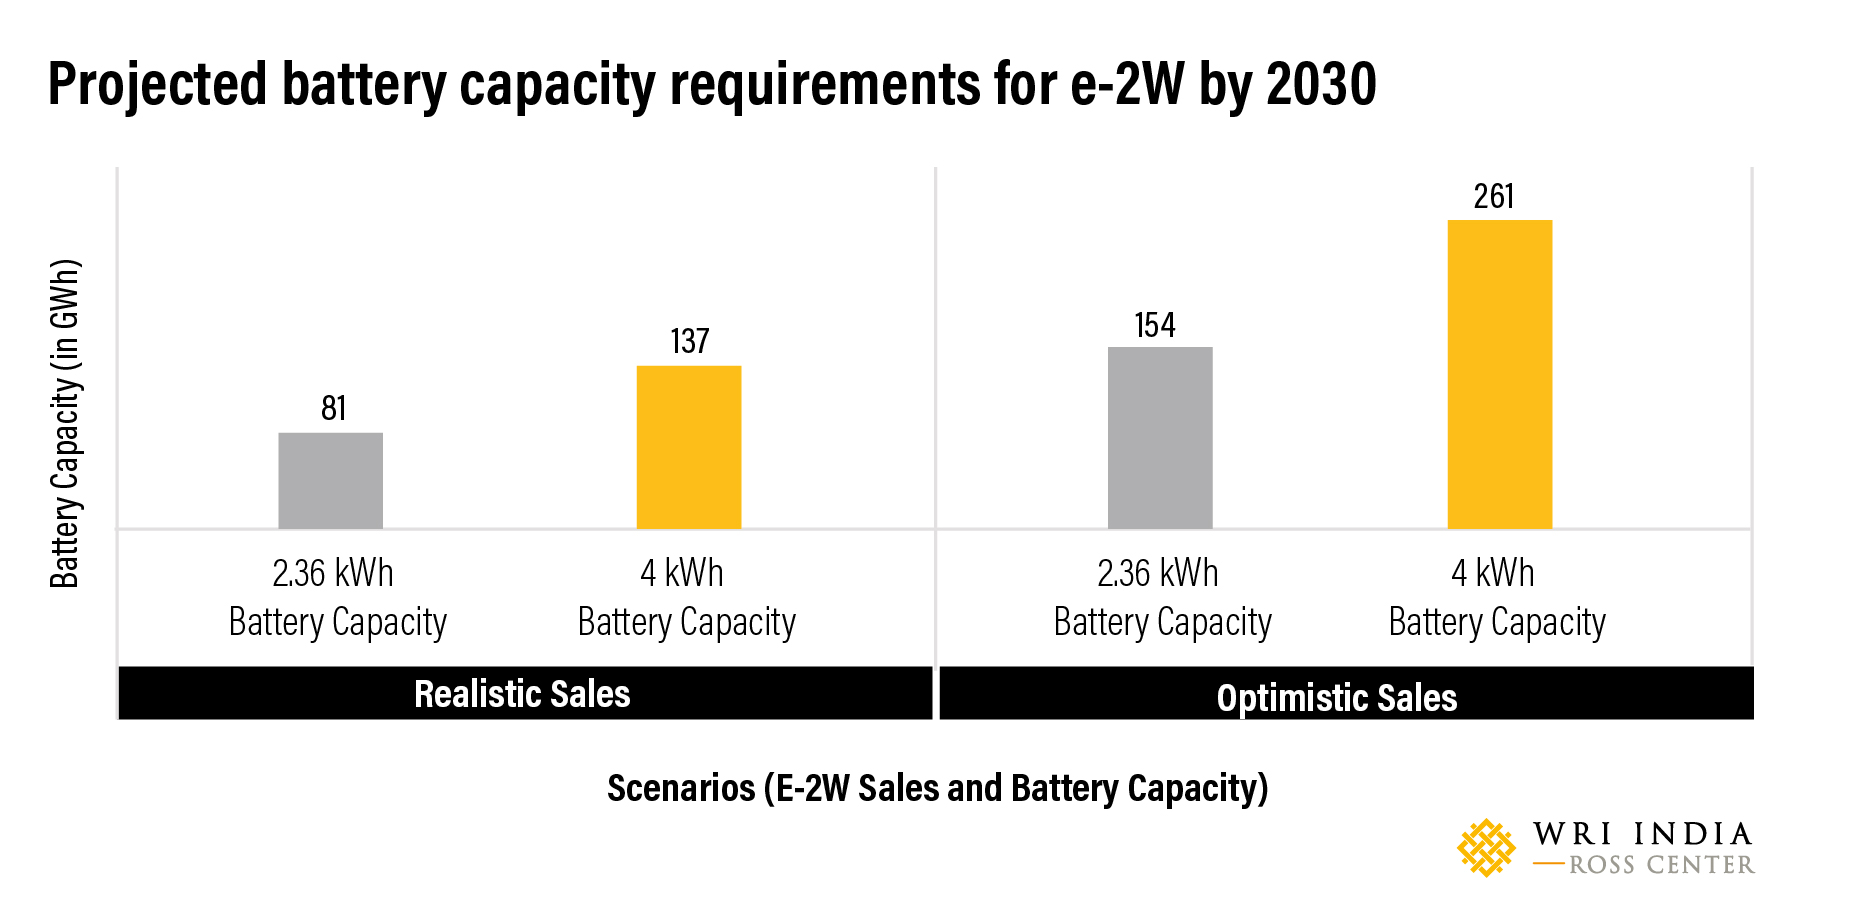 Projected battery capacity requirements for e-2W by 2030